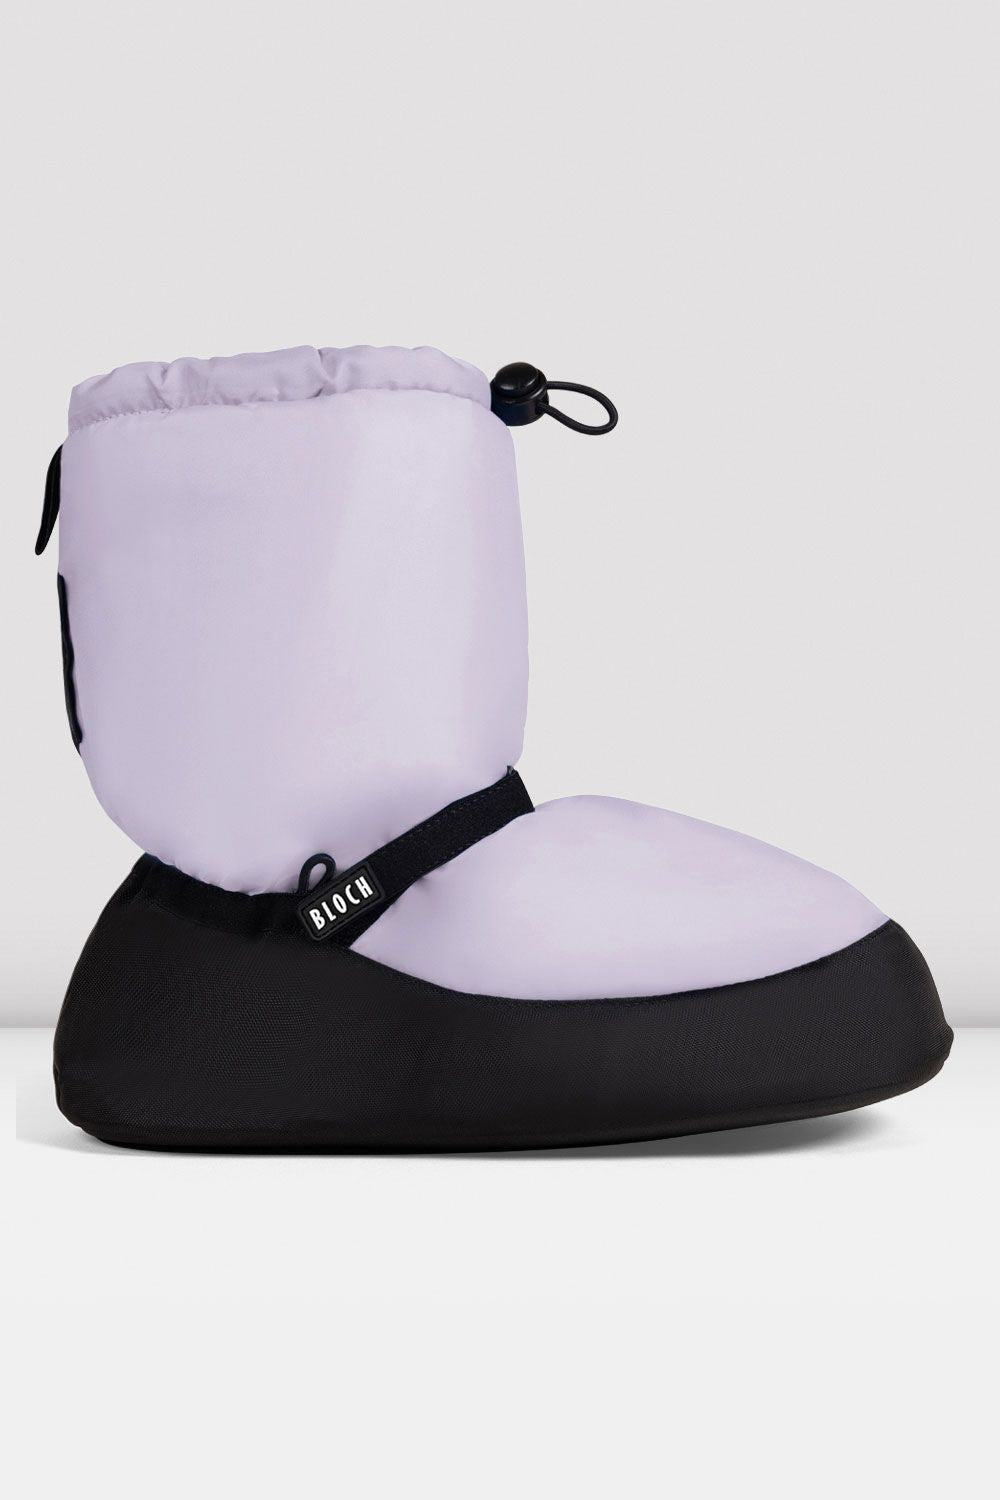 BLOCH Childrens Warm Up Booties, Lilac Nylon